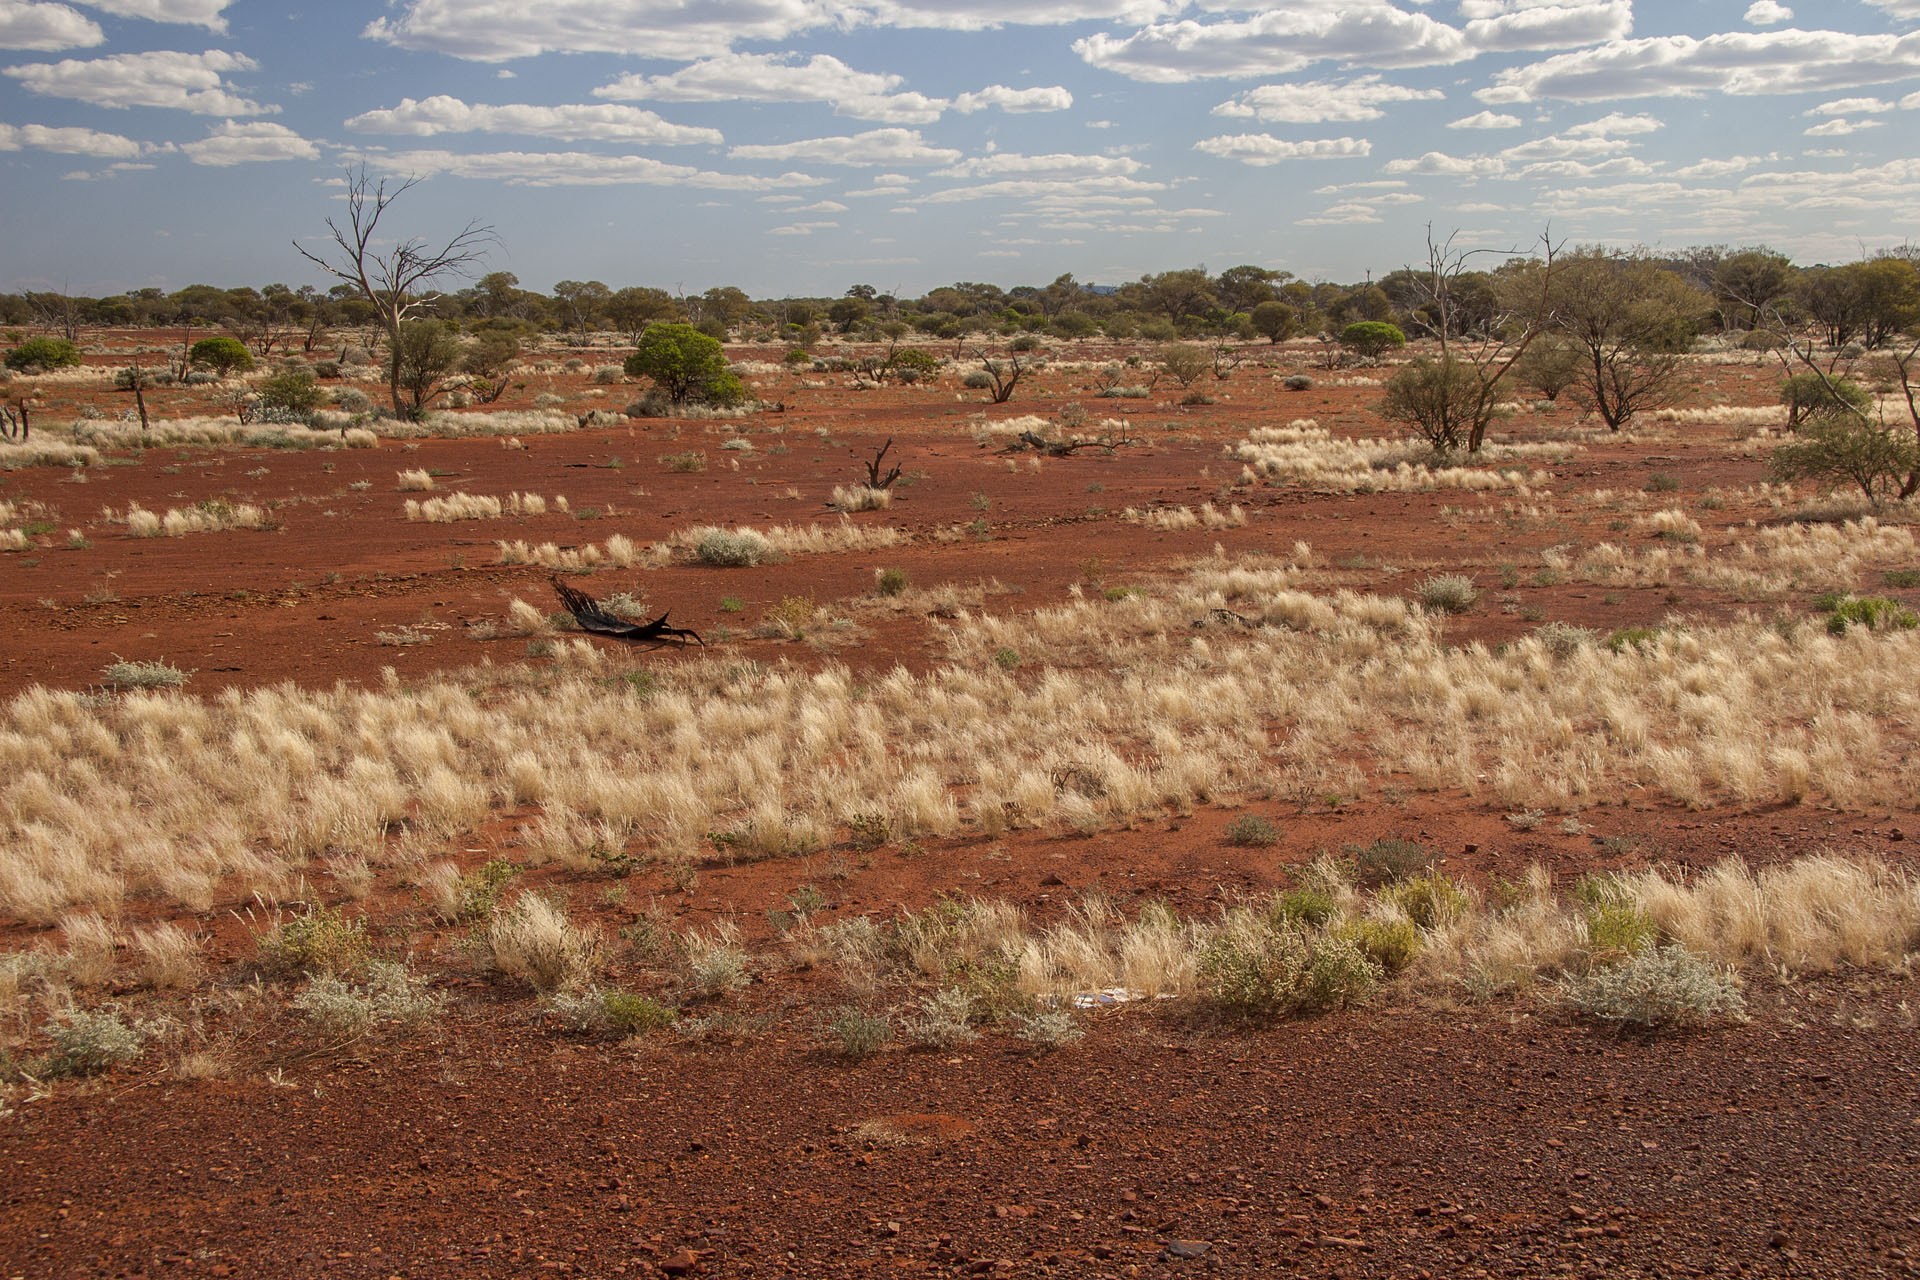 Deep red soil and golden spinifex: Pilbara is close.